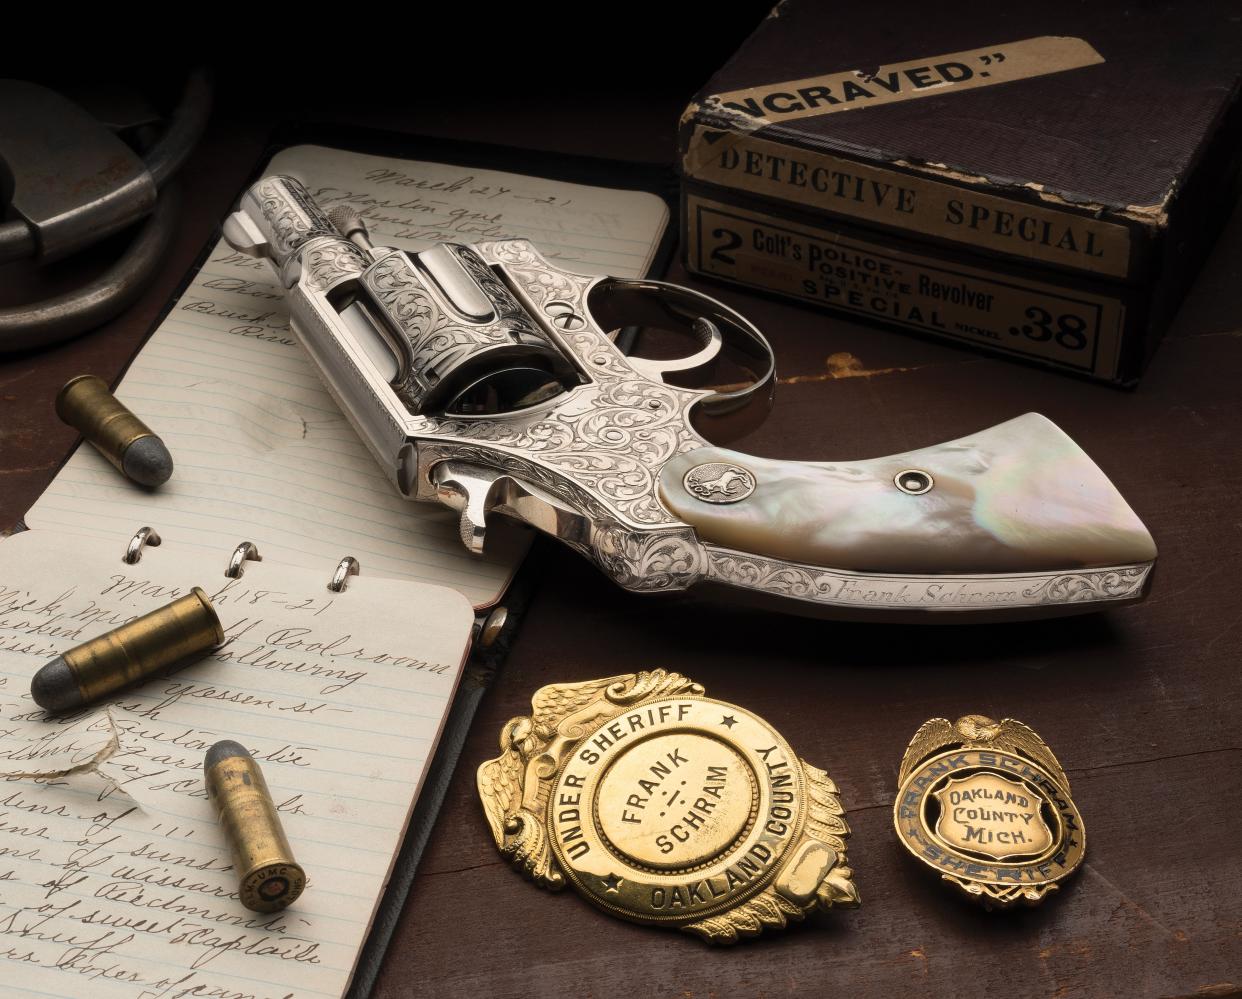 A revolver and items once owned by Oakland Country Sheriff Frank Schram.